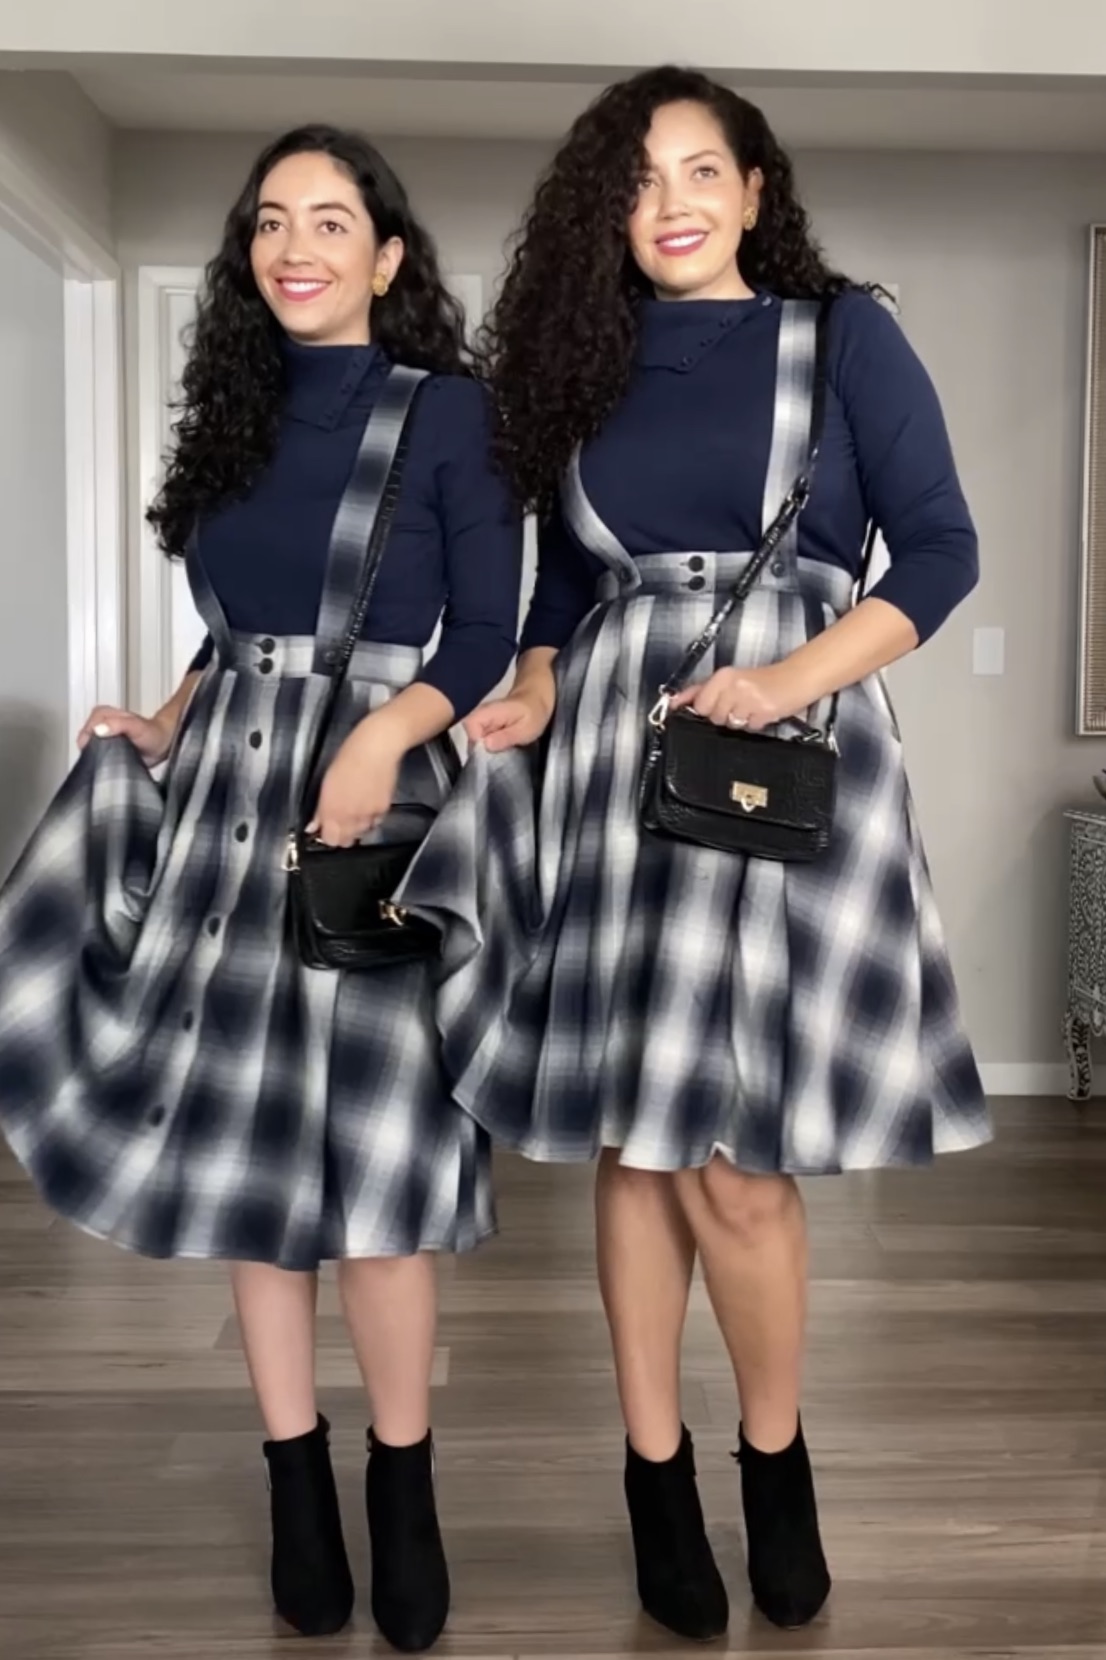 Style Has No Size: Plaid Skirt, Wide Leg Pant & Lace Dress | Girl With Curves